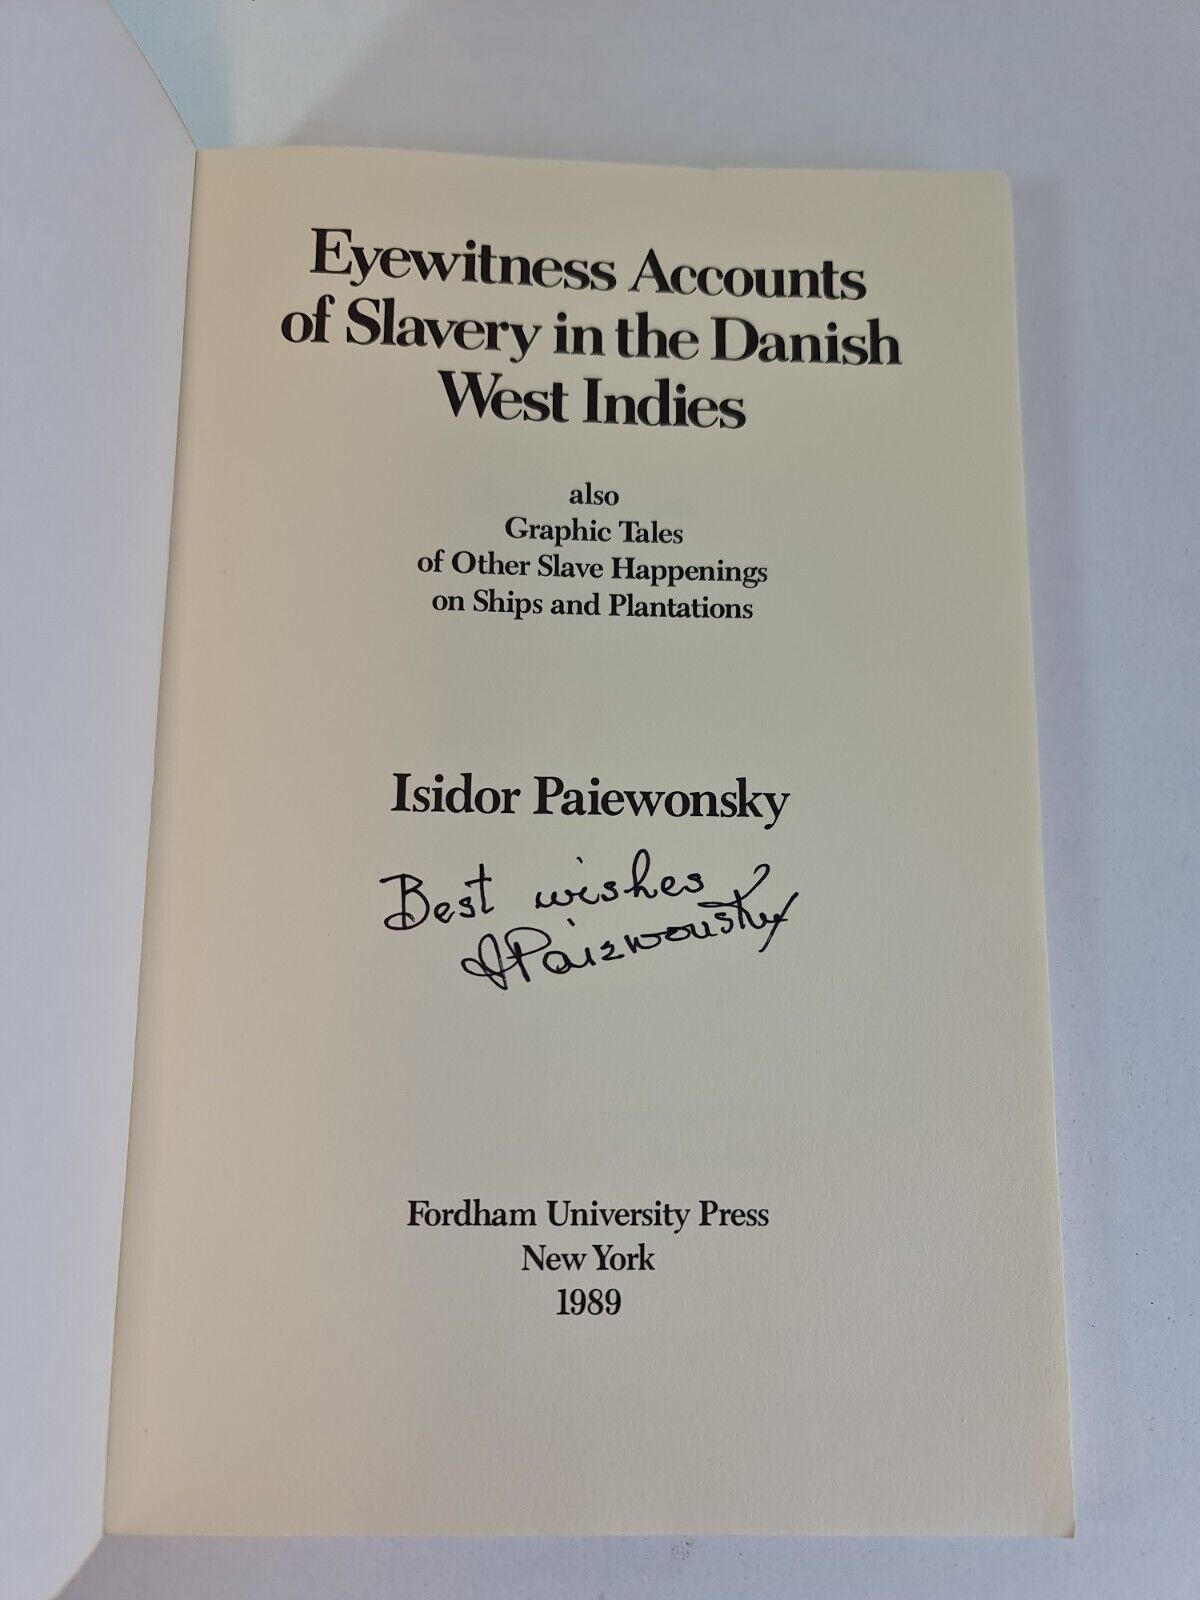 SIGNED- Eyewitness Accounts of Slavery in the Danish West ...by Paiewonsky (1987)